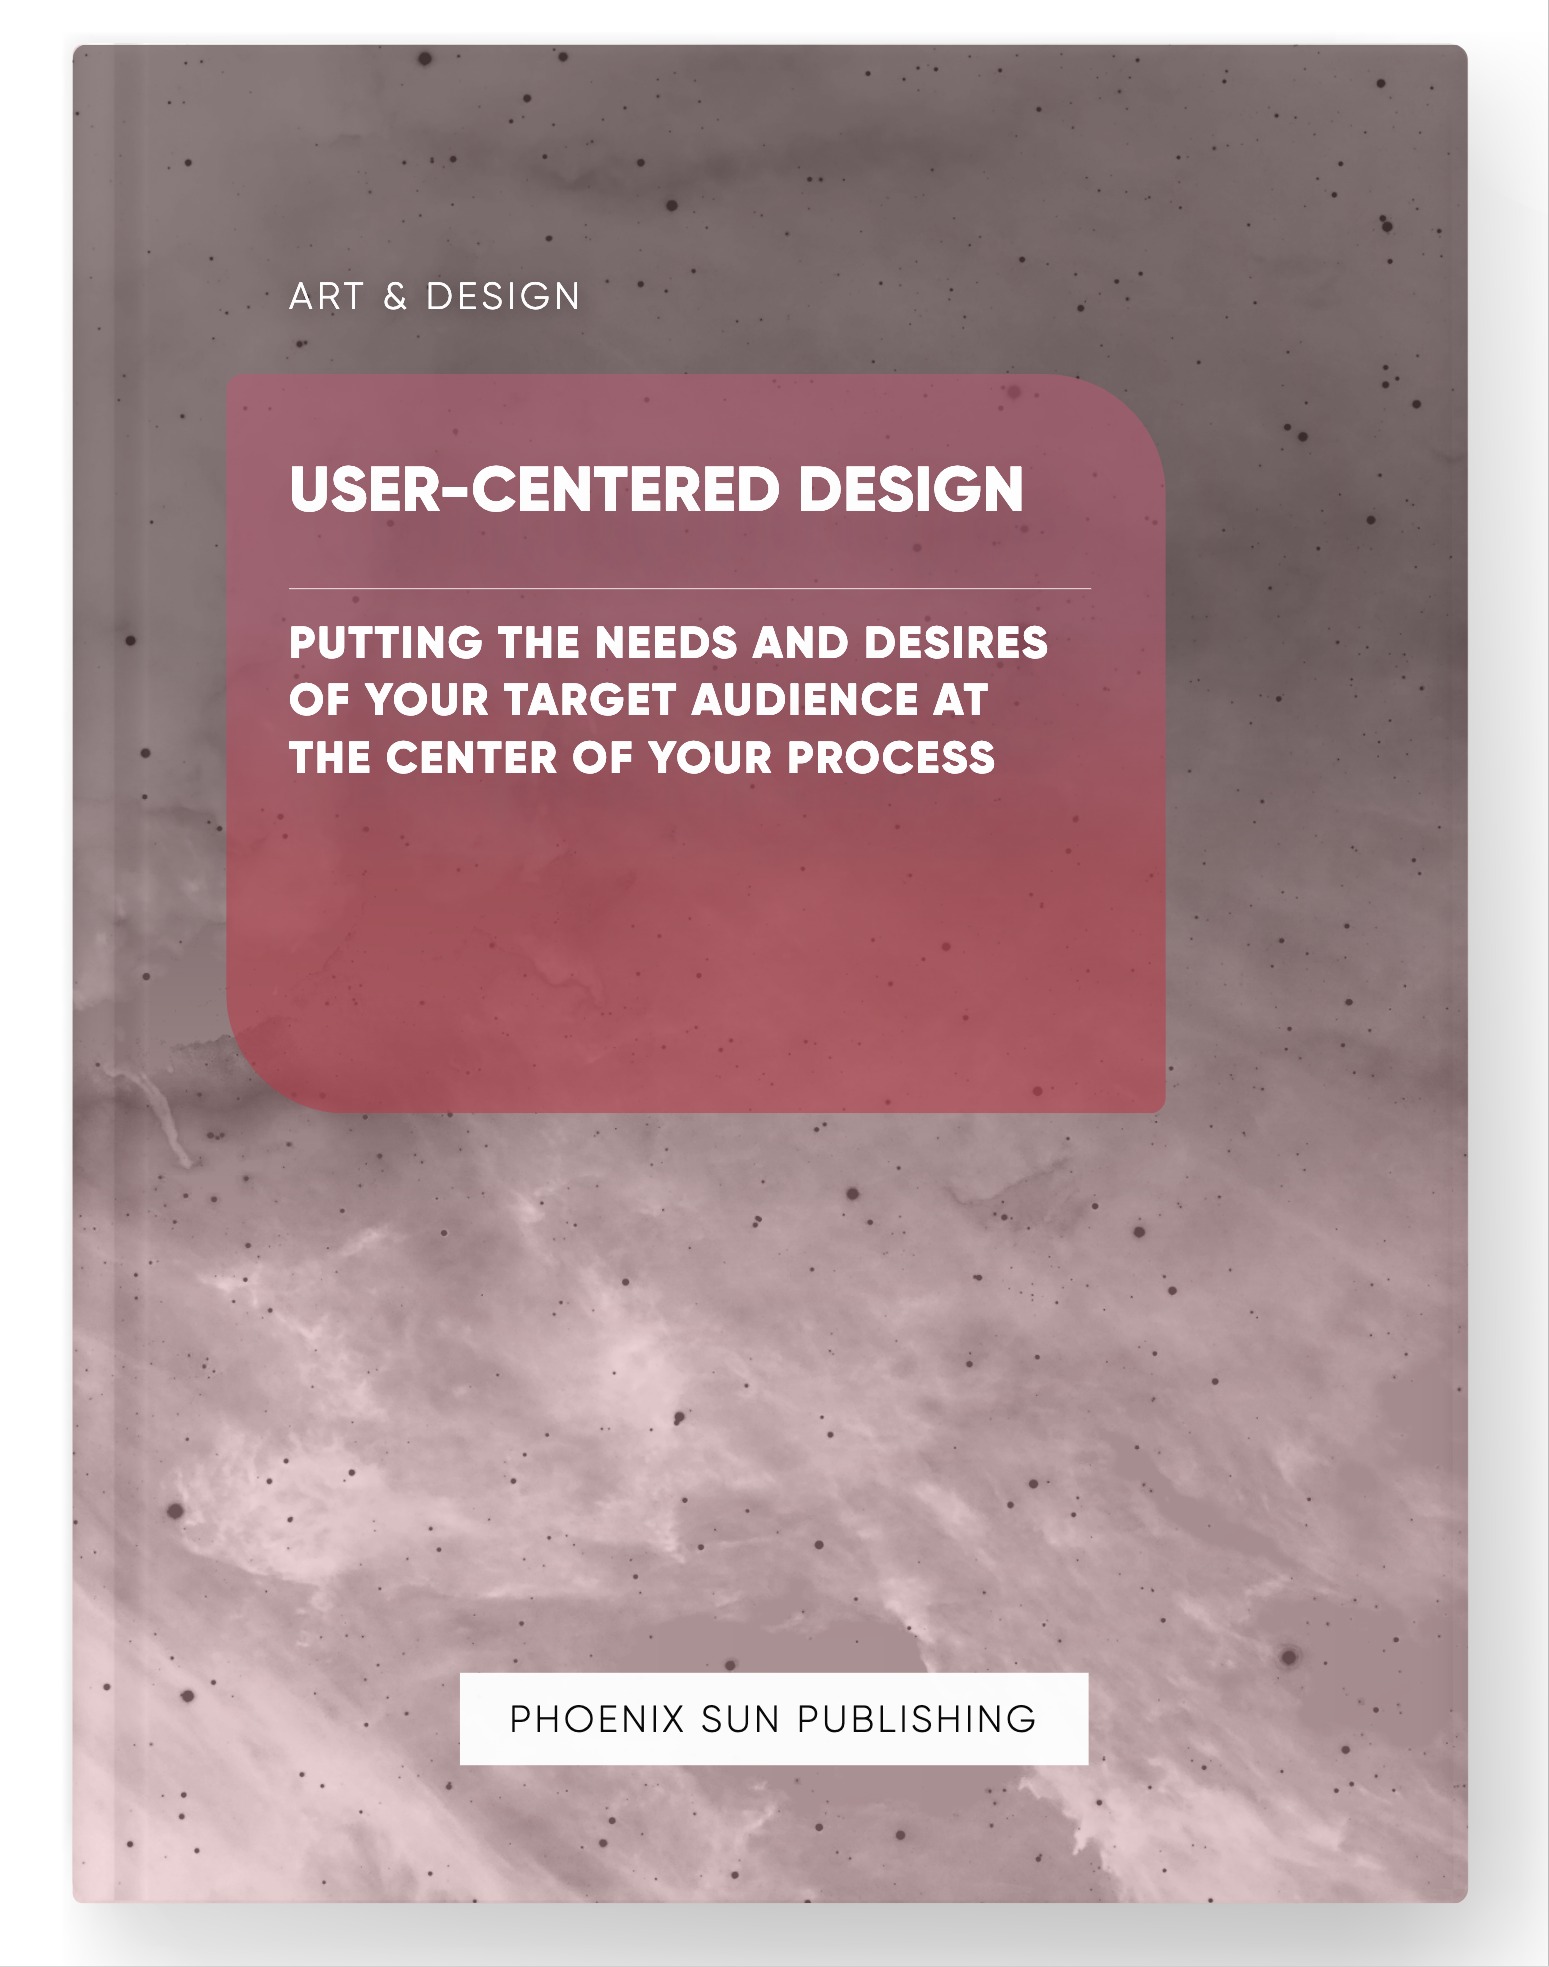 User-Centered Design – Putting the Needs and Desires of Your Target Audience at the Center of Your Process